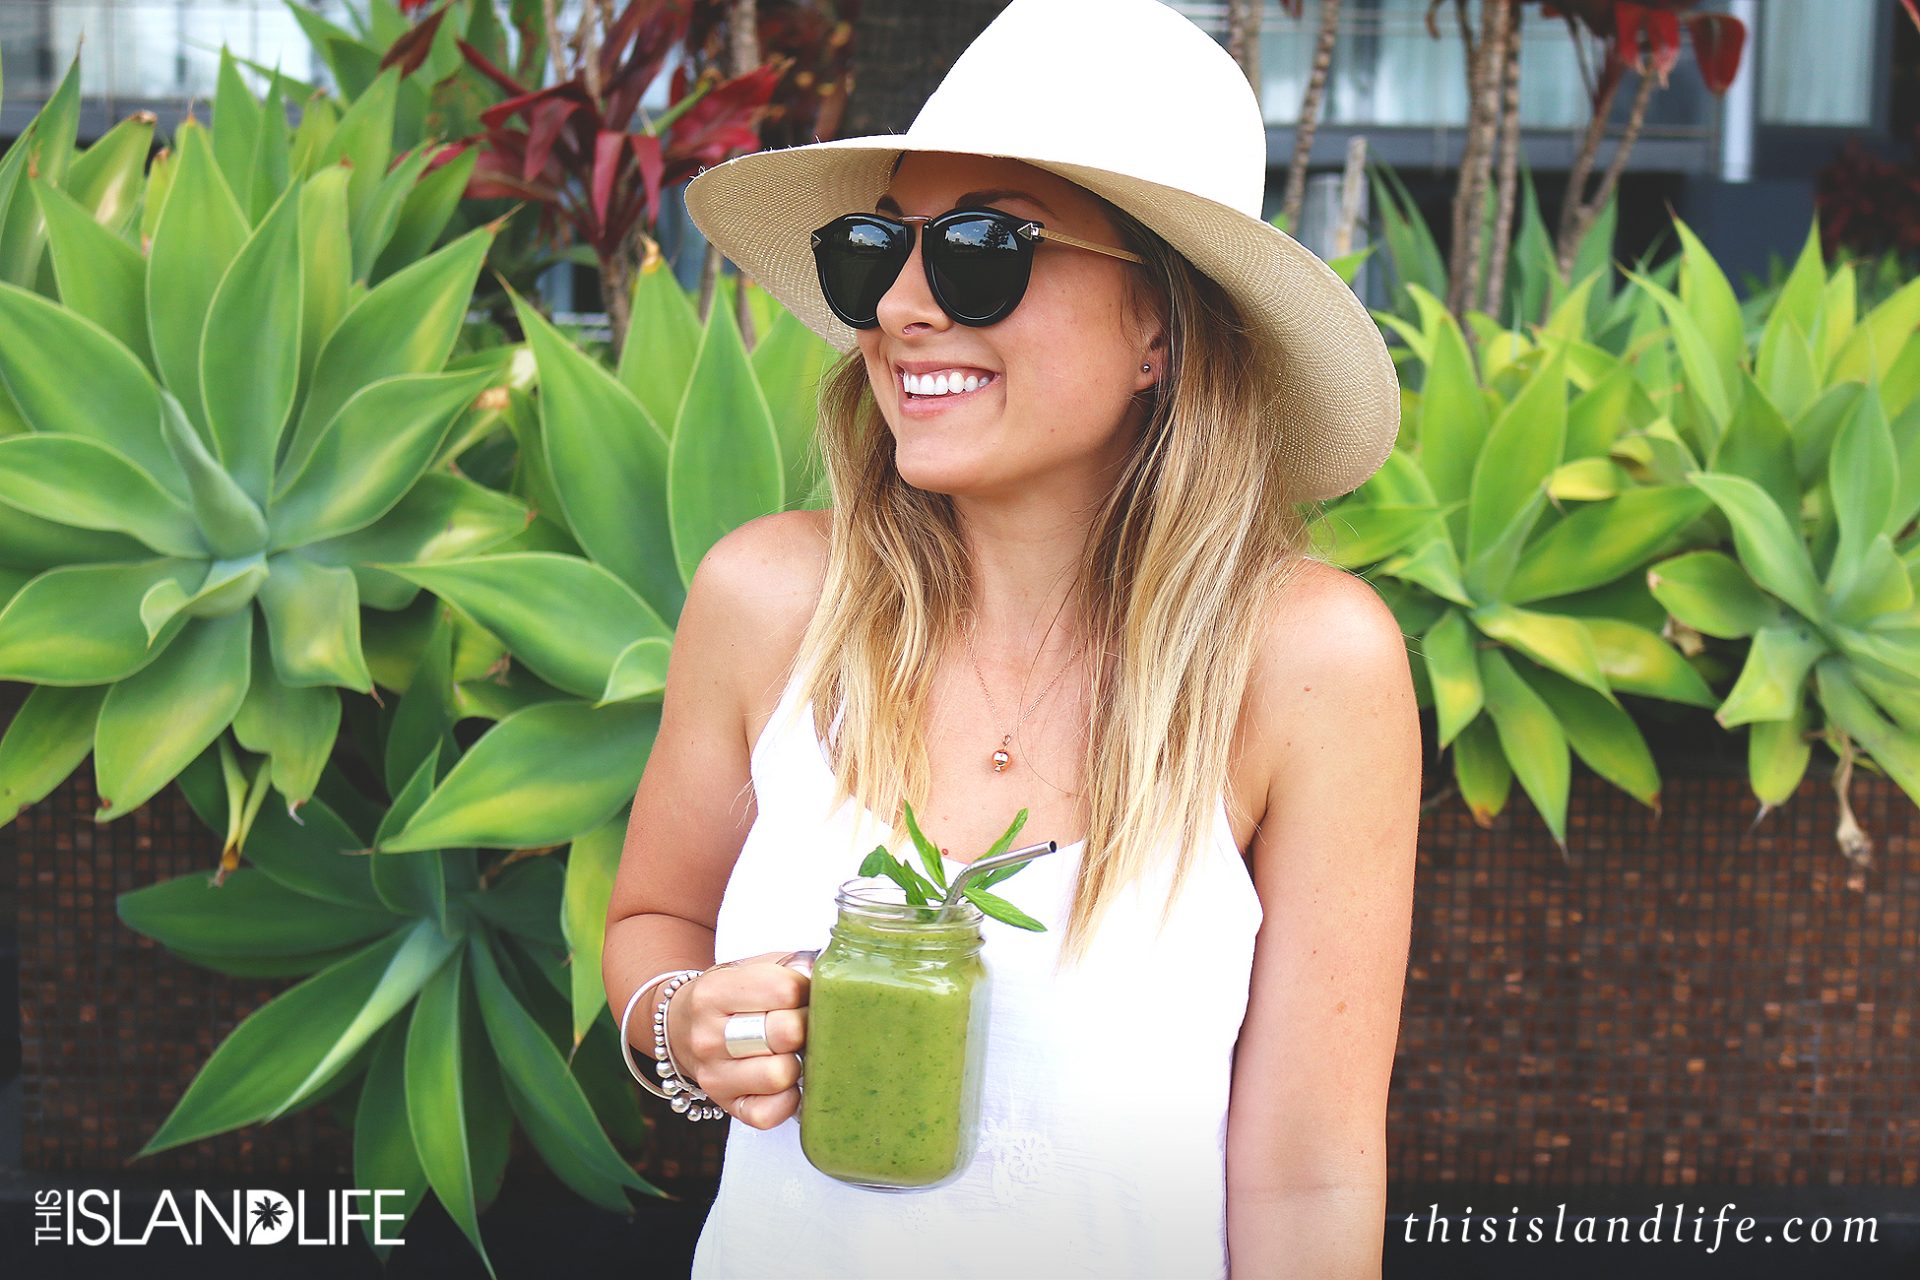 THIS ISLAND LIFE | Green smoothies with Blackmores Super Greens